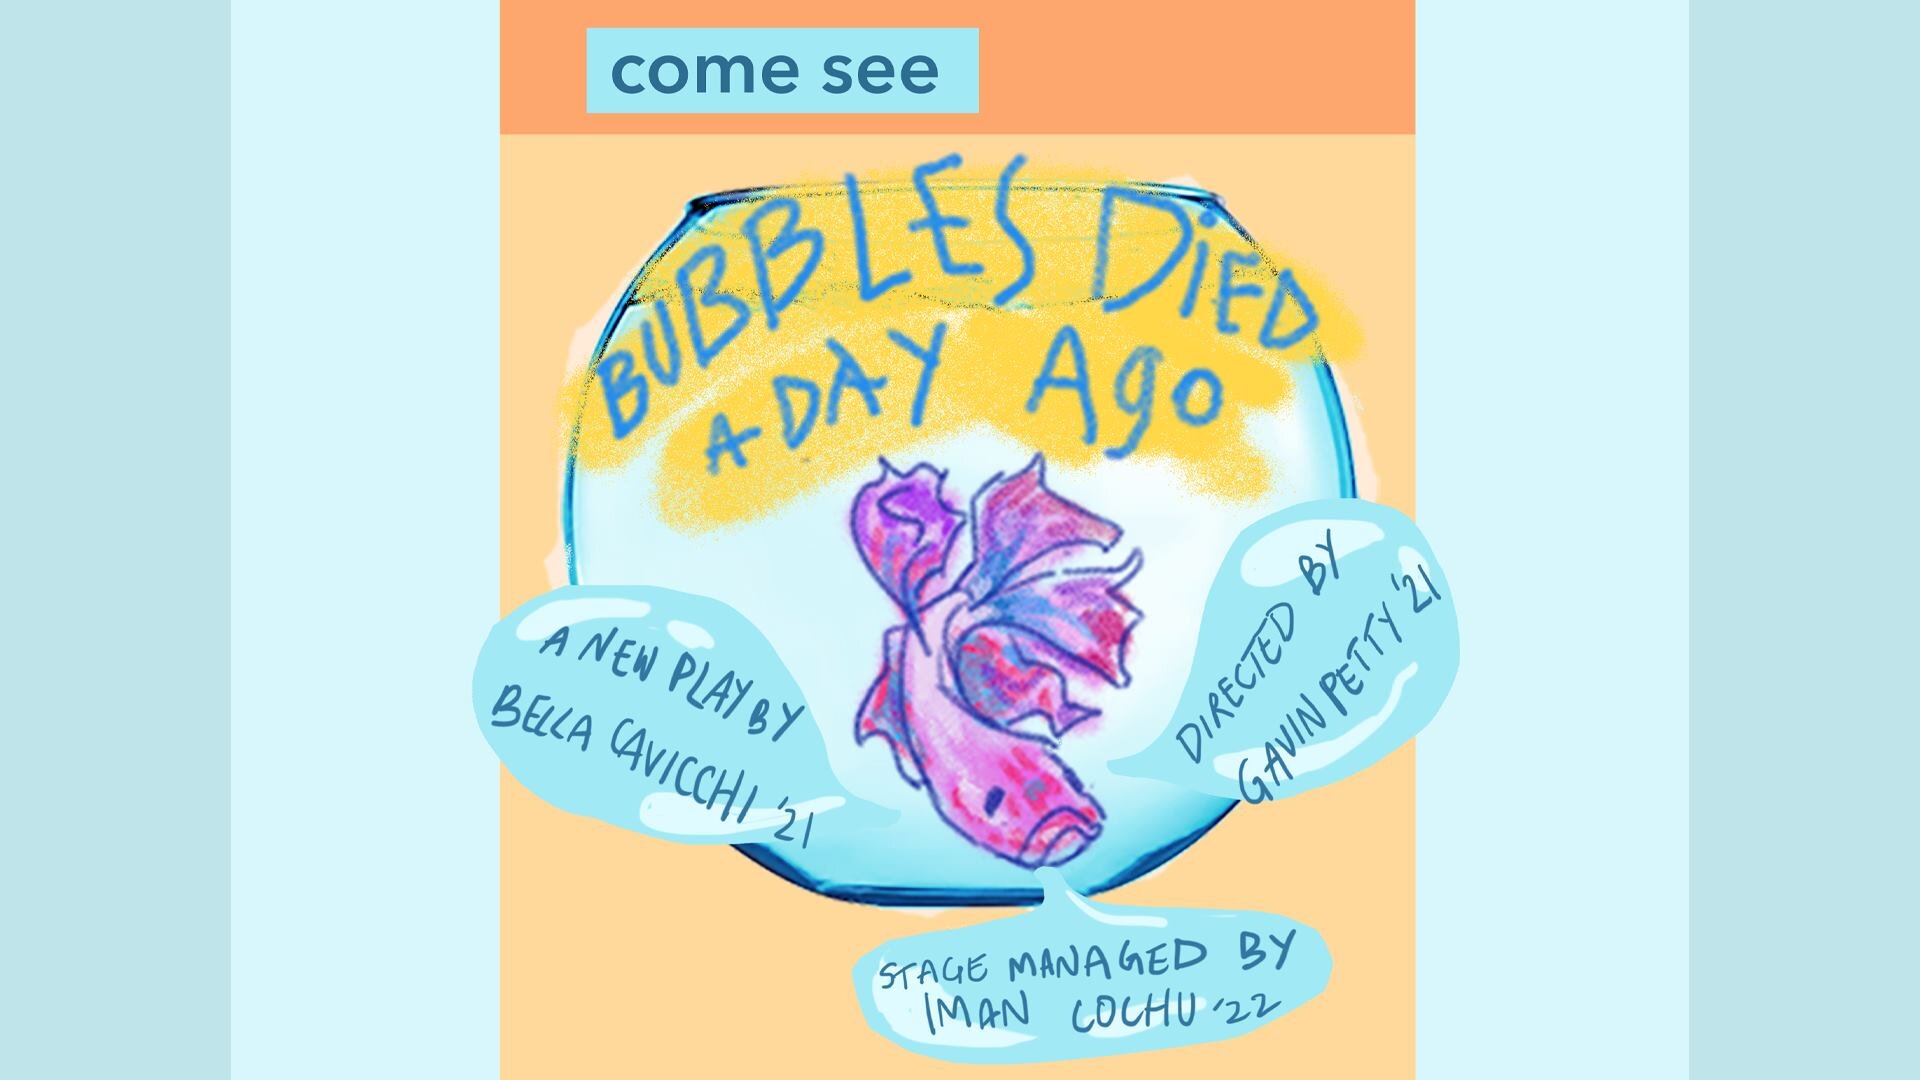 Bubbles Died A Day Ago Brown Theatre Collective Iman cochu download free and listen online. brown theatre collective